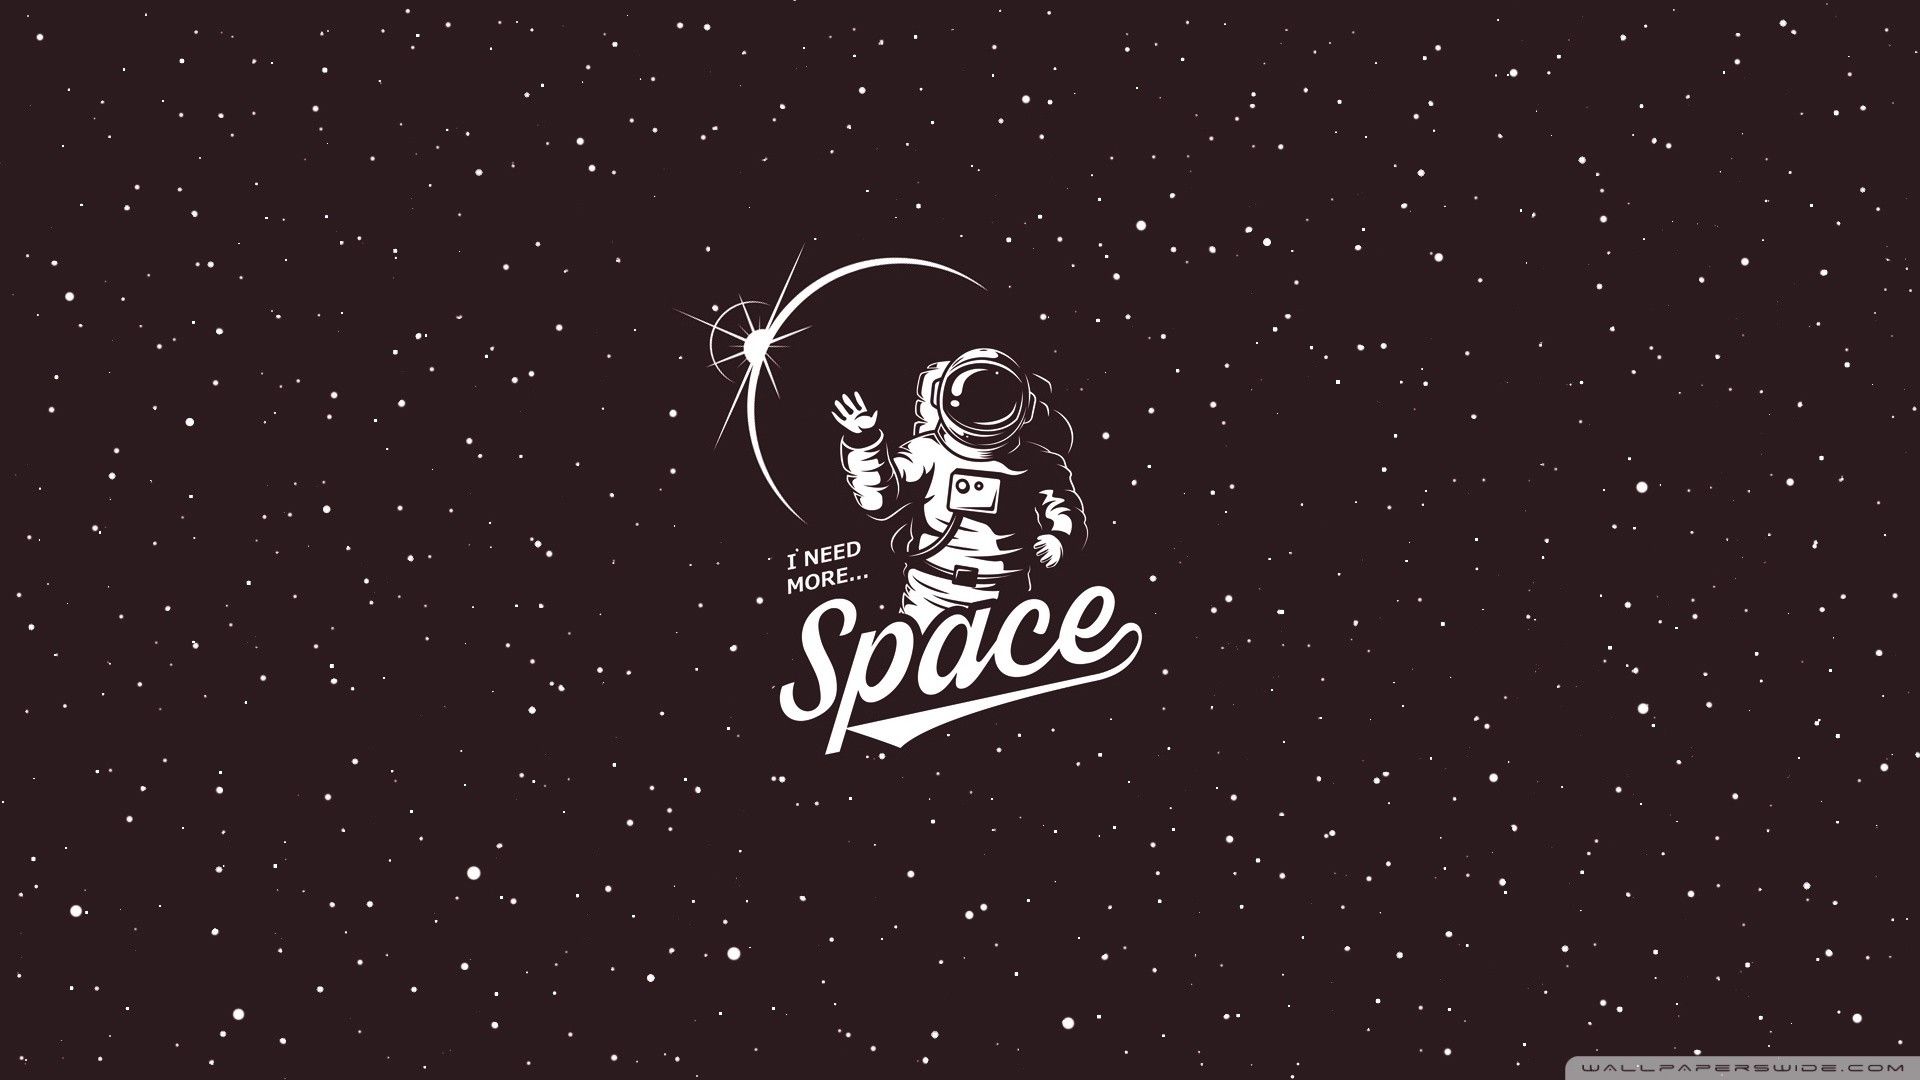 Aesthetic Space for Laptop Wallpapers on WallpaperDog